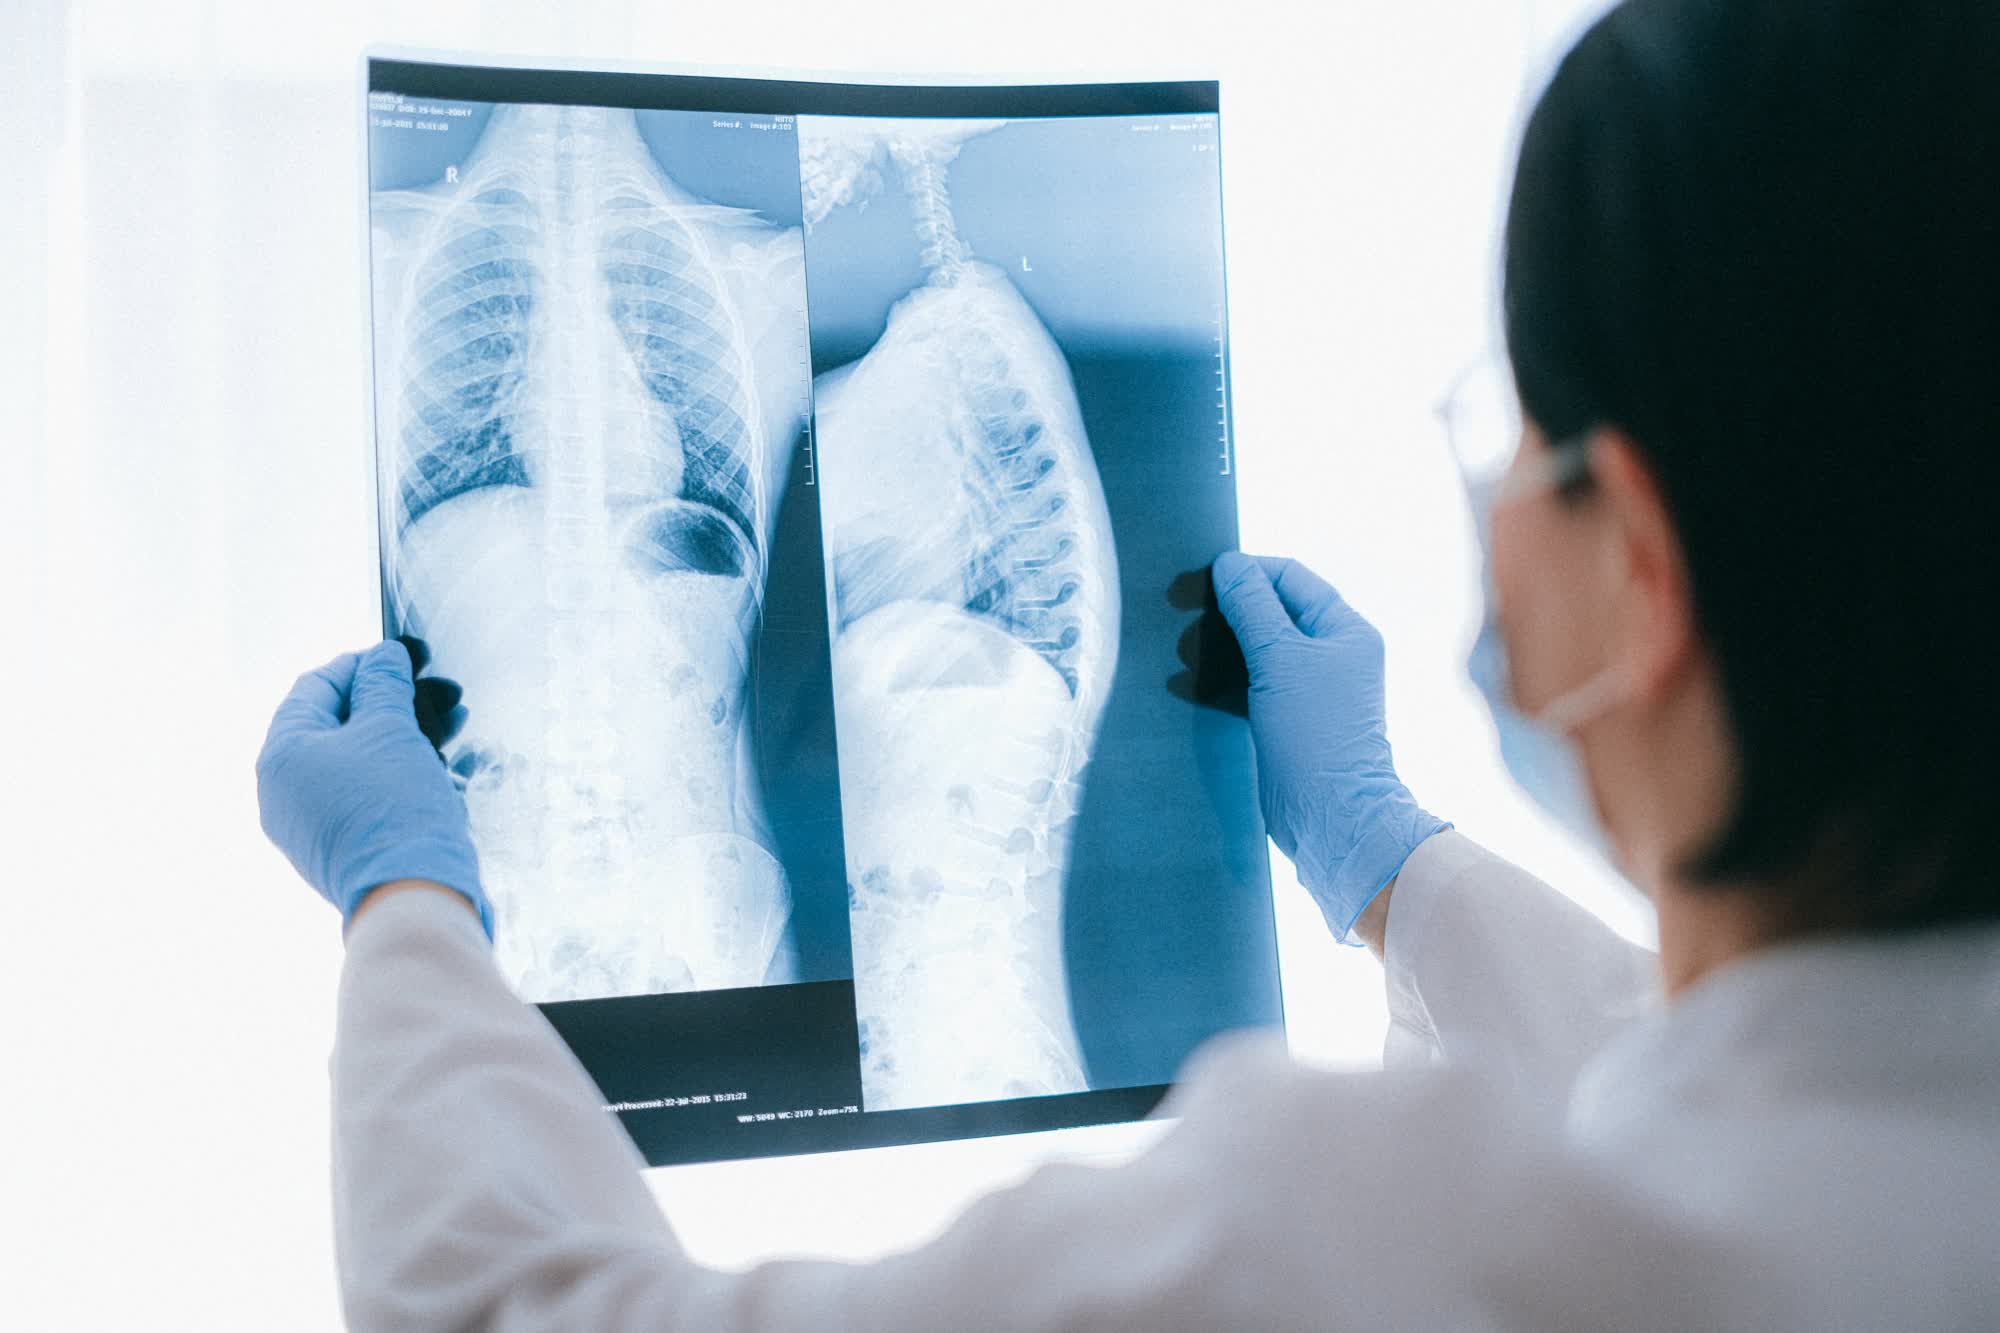 AI is just as good as a doctor at analyzing chest X-rays